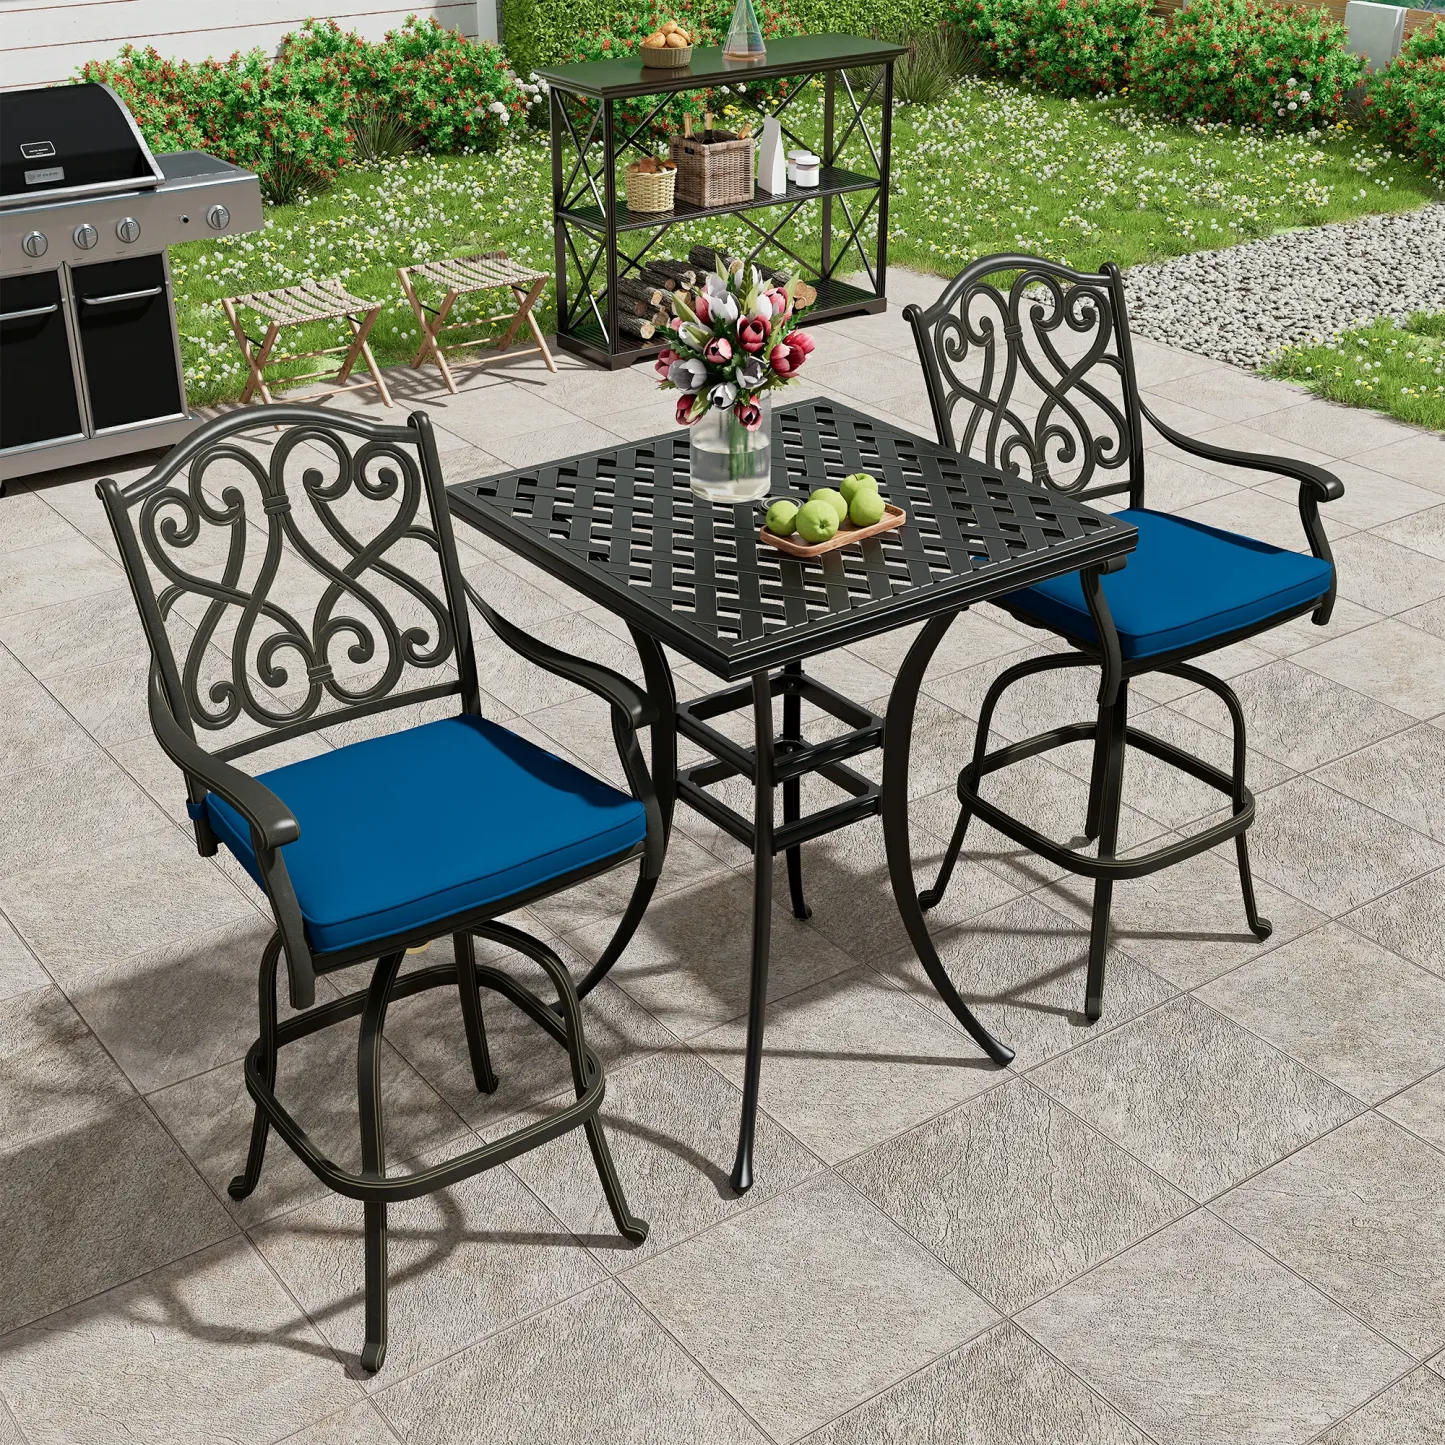 Square Outdoor Table Bar Stool 29-in W x 29-in L with Umbrella Hole